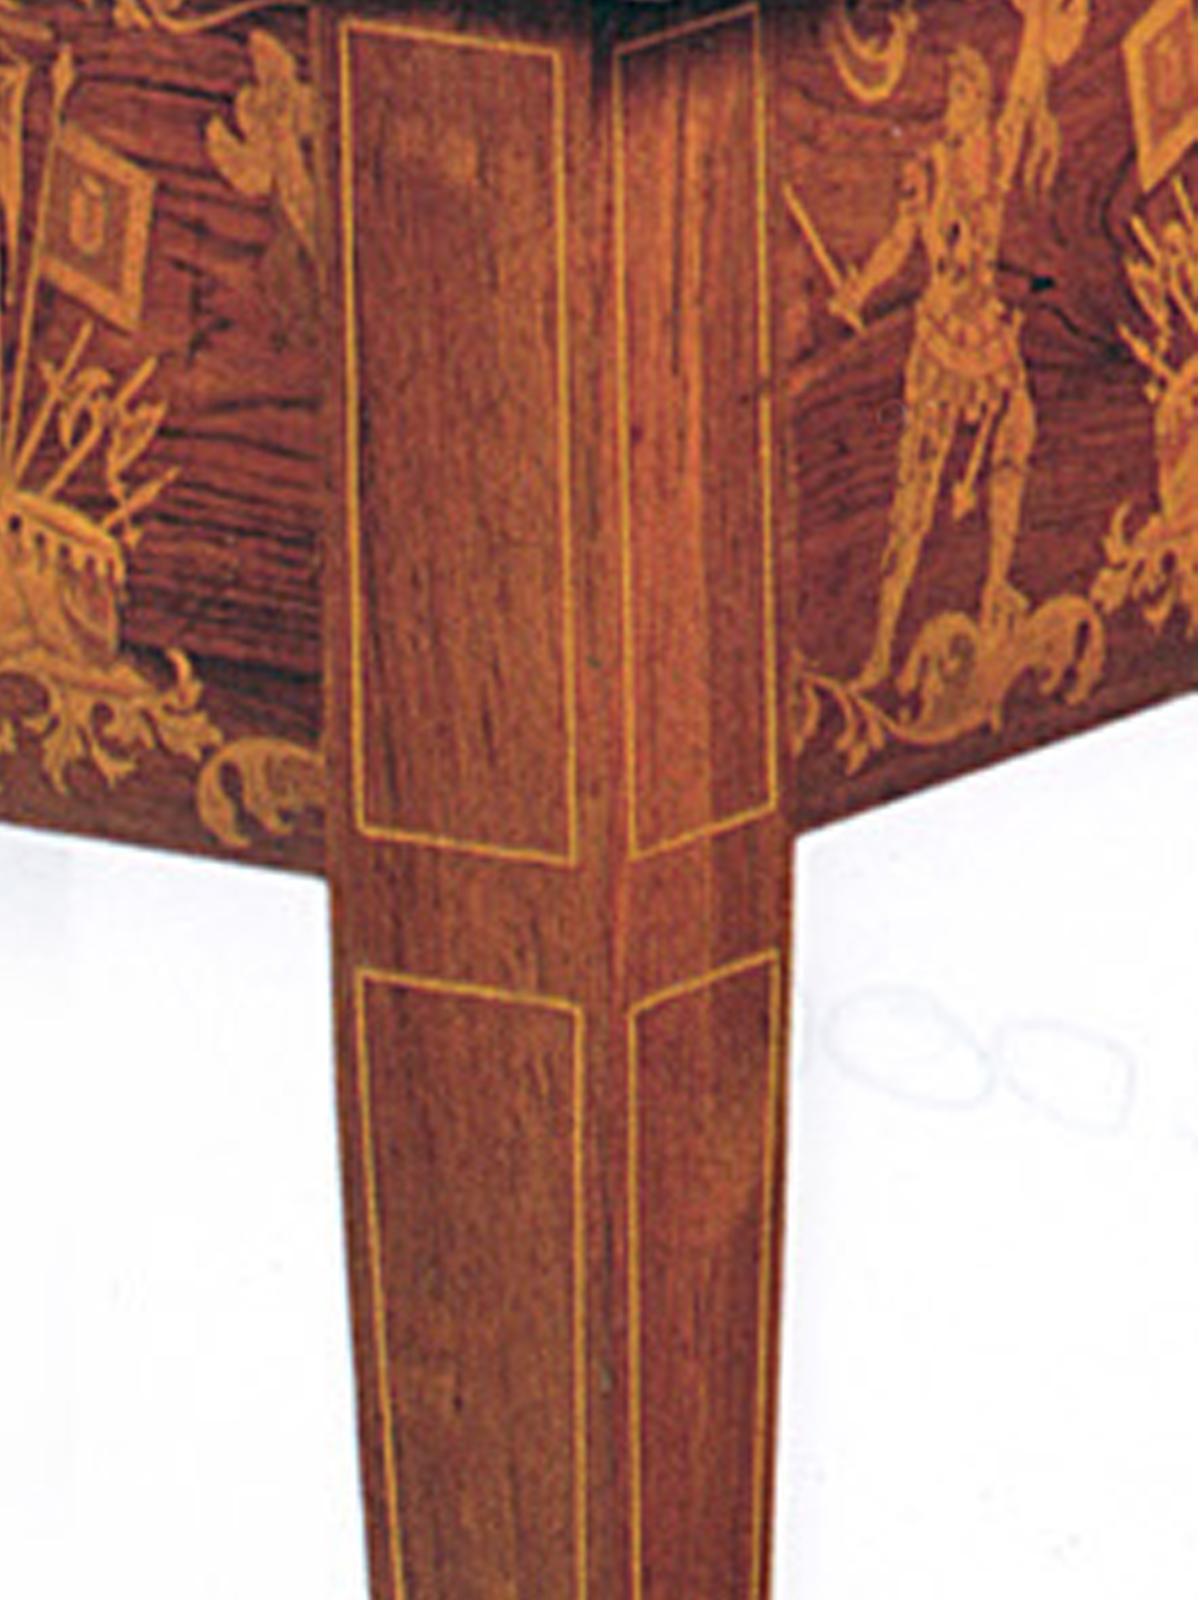 19th Century 19th century Neoclassical Marquetry Center Table